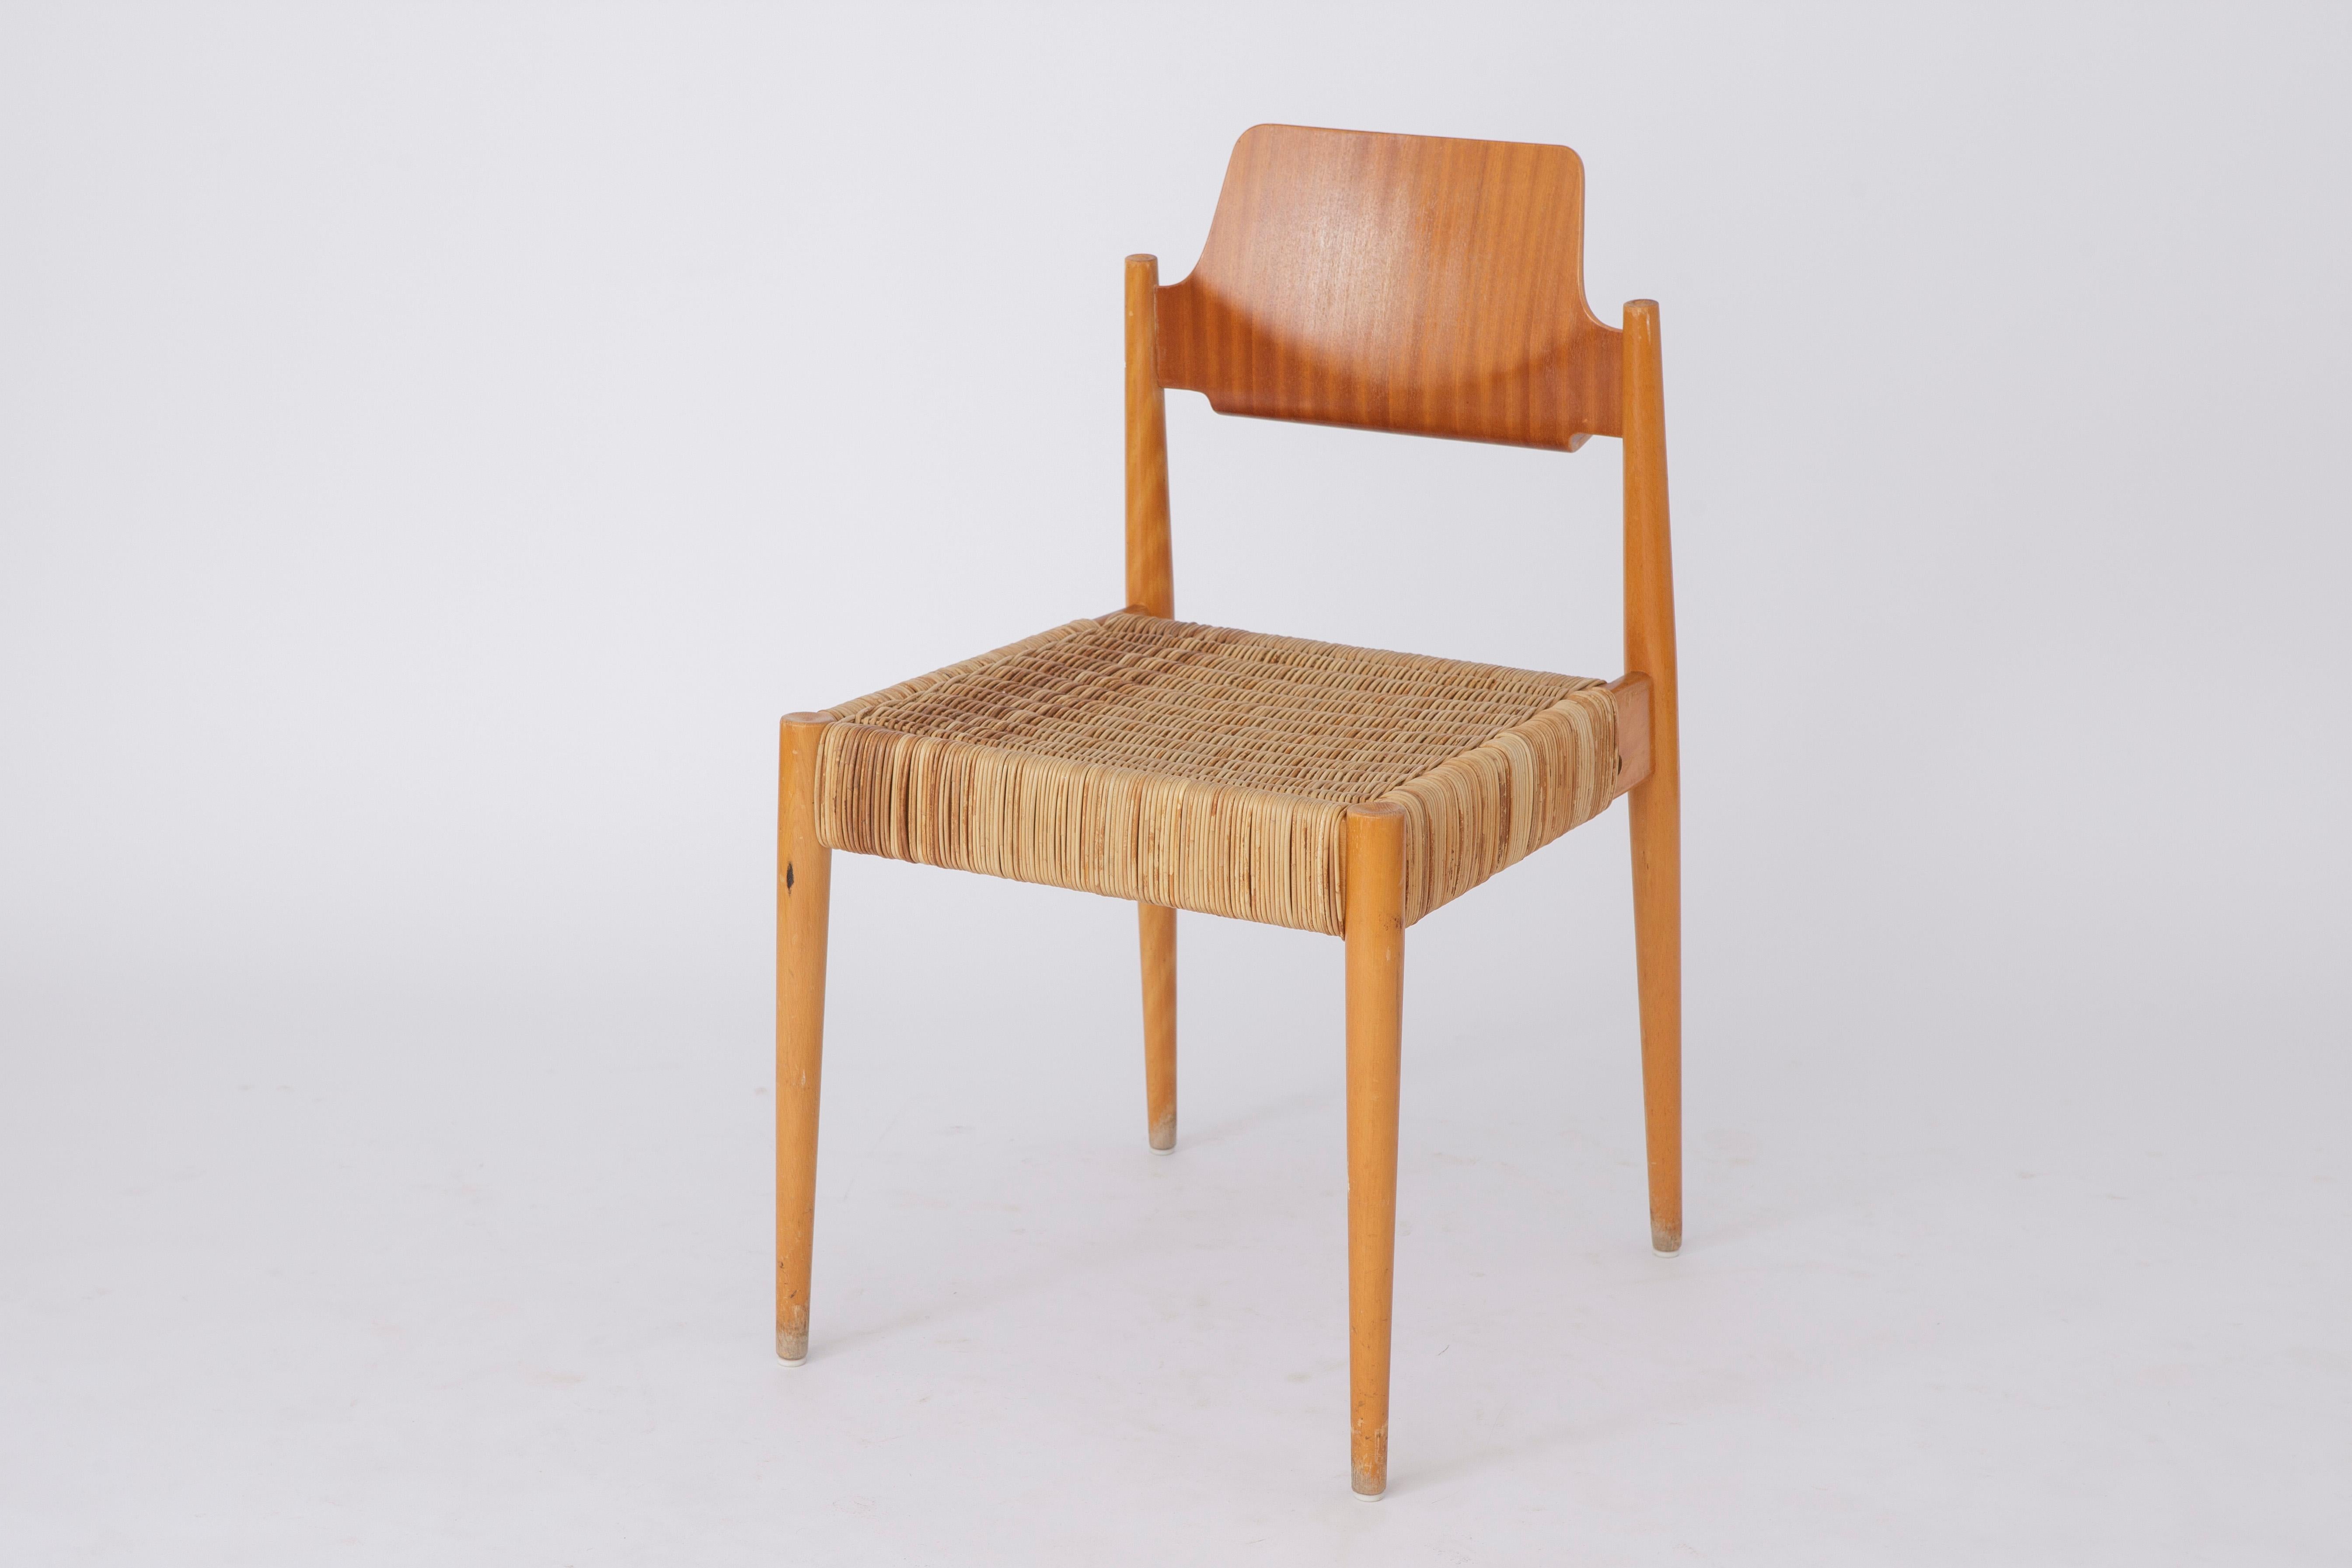 Mid-20th Century 6 Chairs Egon Eiermann Chairs #SE19 Bauhaus Germany 1950s Vintage For Sale